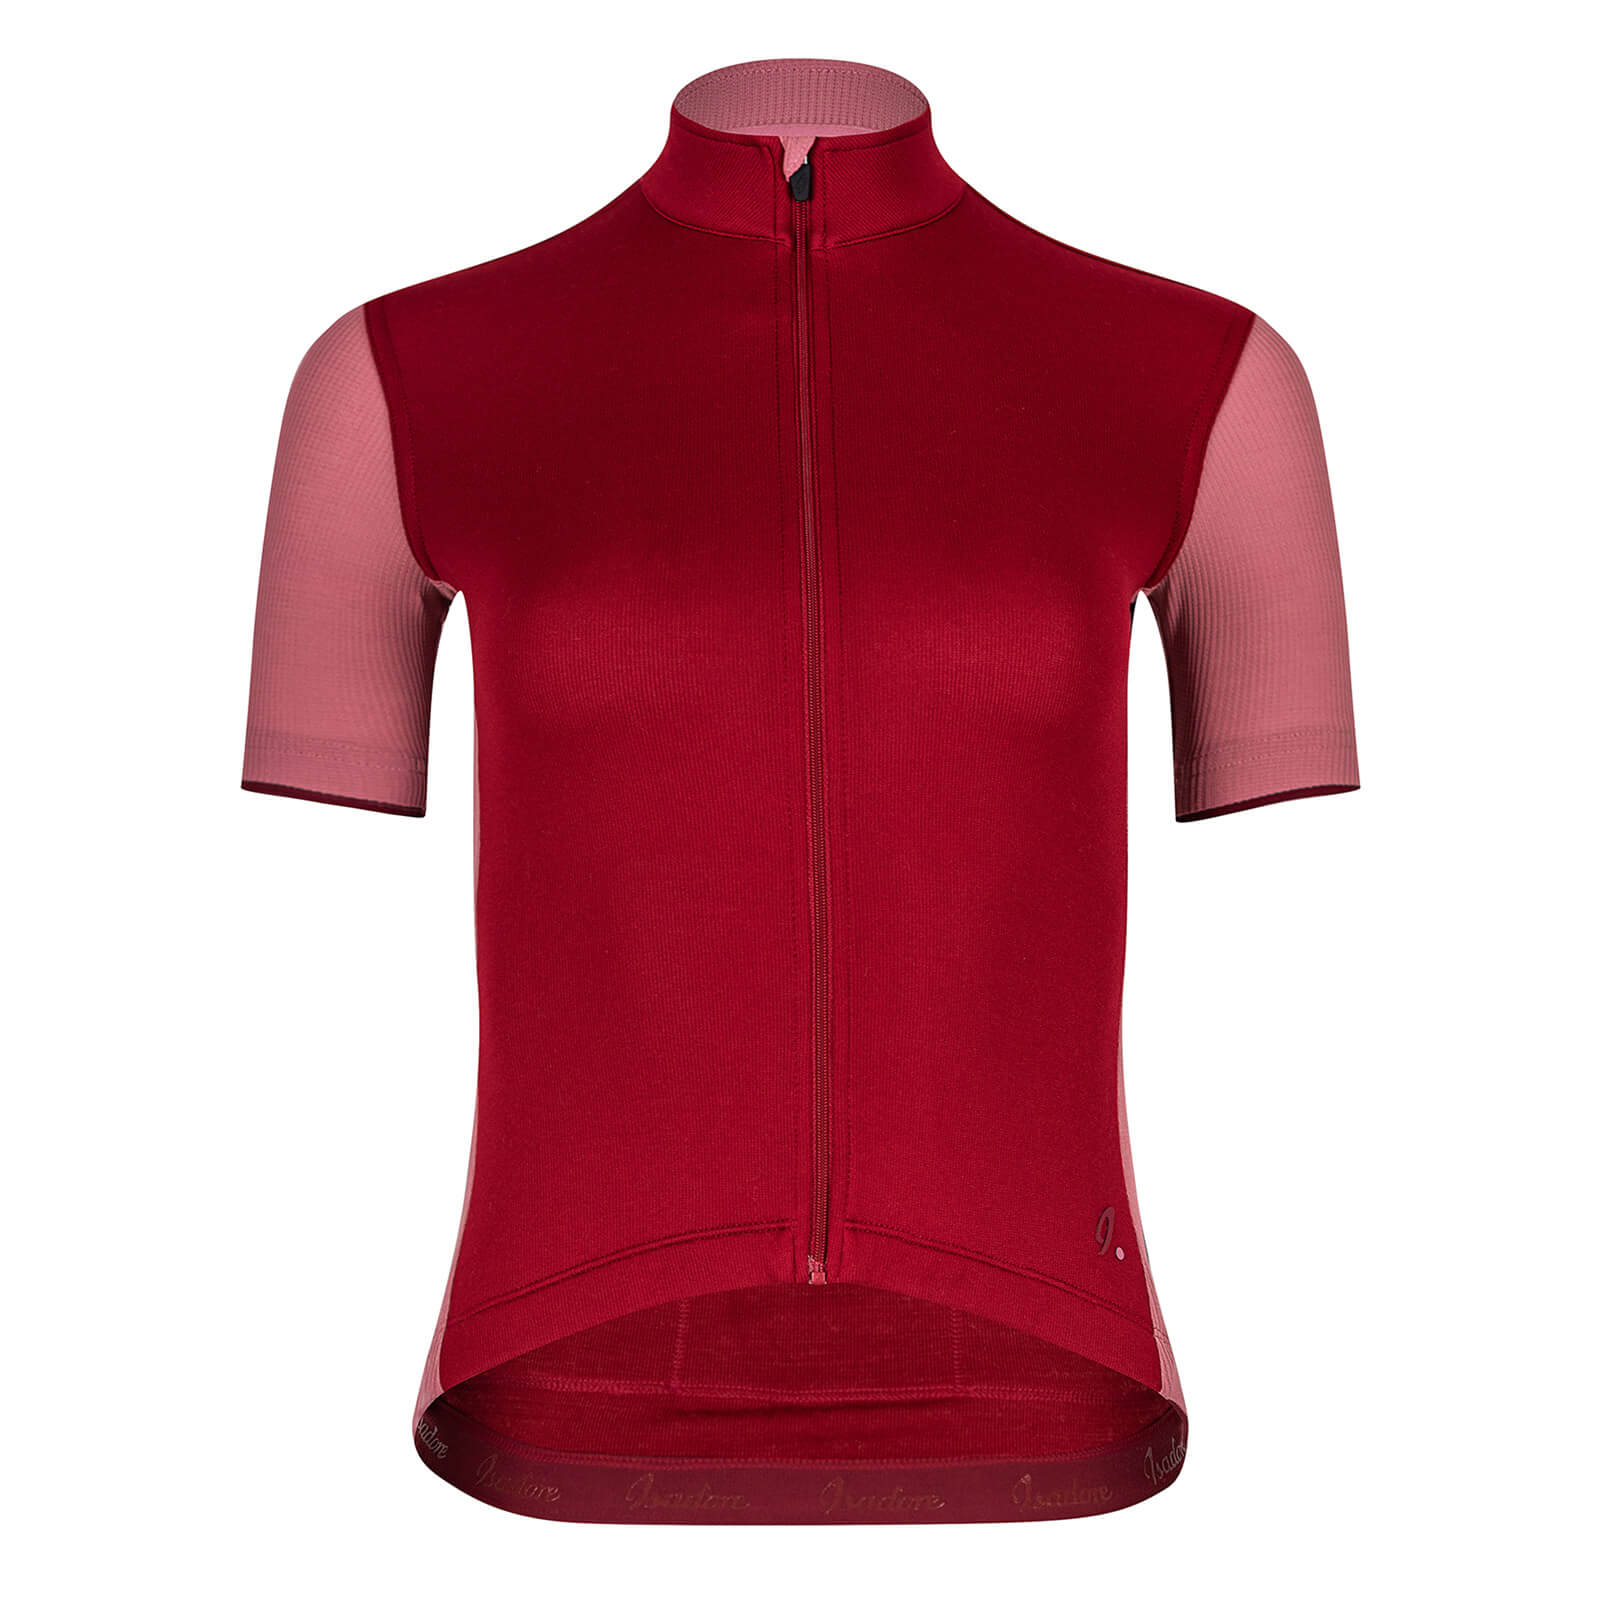 Isadore Signature Women's Short Sleeve Jersey - Small - Rio Red/Mesa Rose